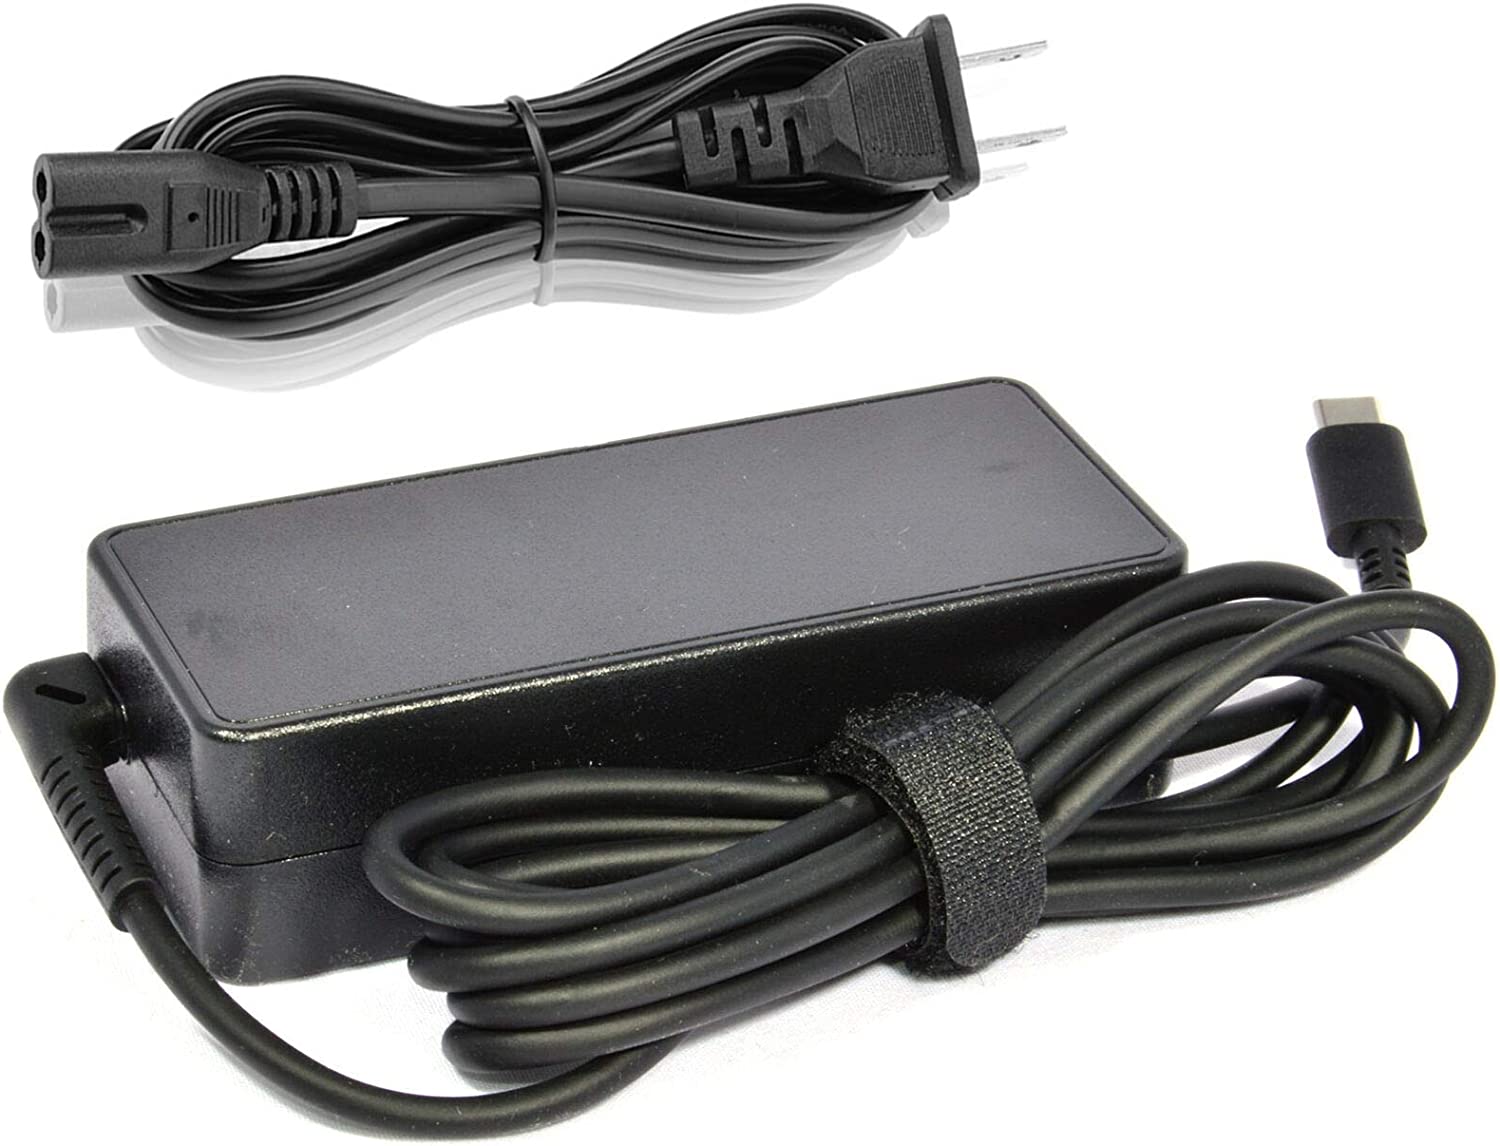 AC/DC Adapter Compatible with Toshiba PA5279E-1AC3 PA5257U-1ACA X20 USB C Power Supply Cord Cable Charger Mains PSU - image 1 of 1